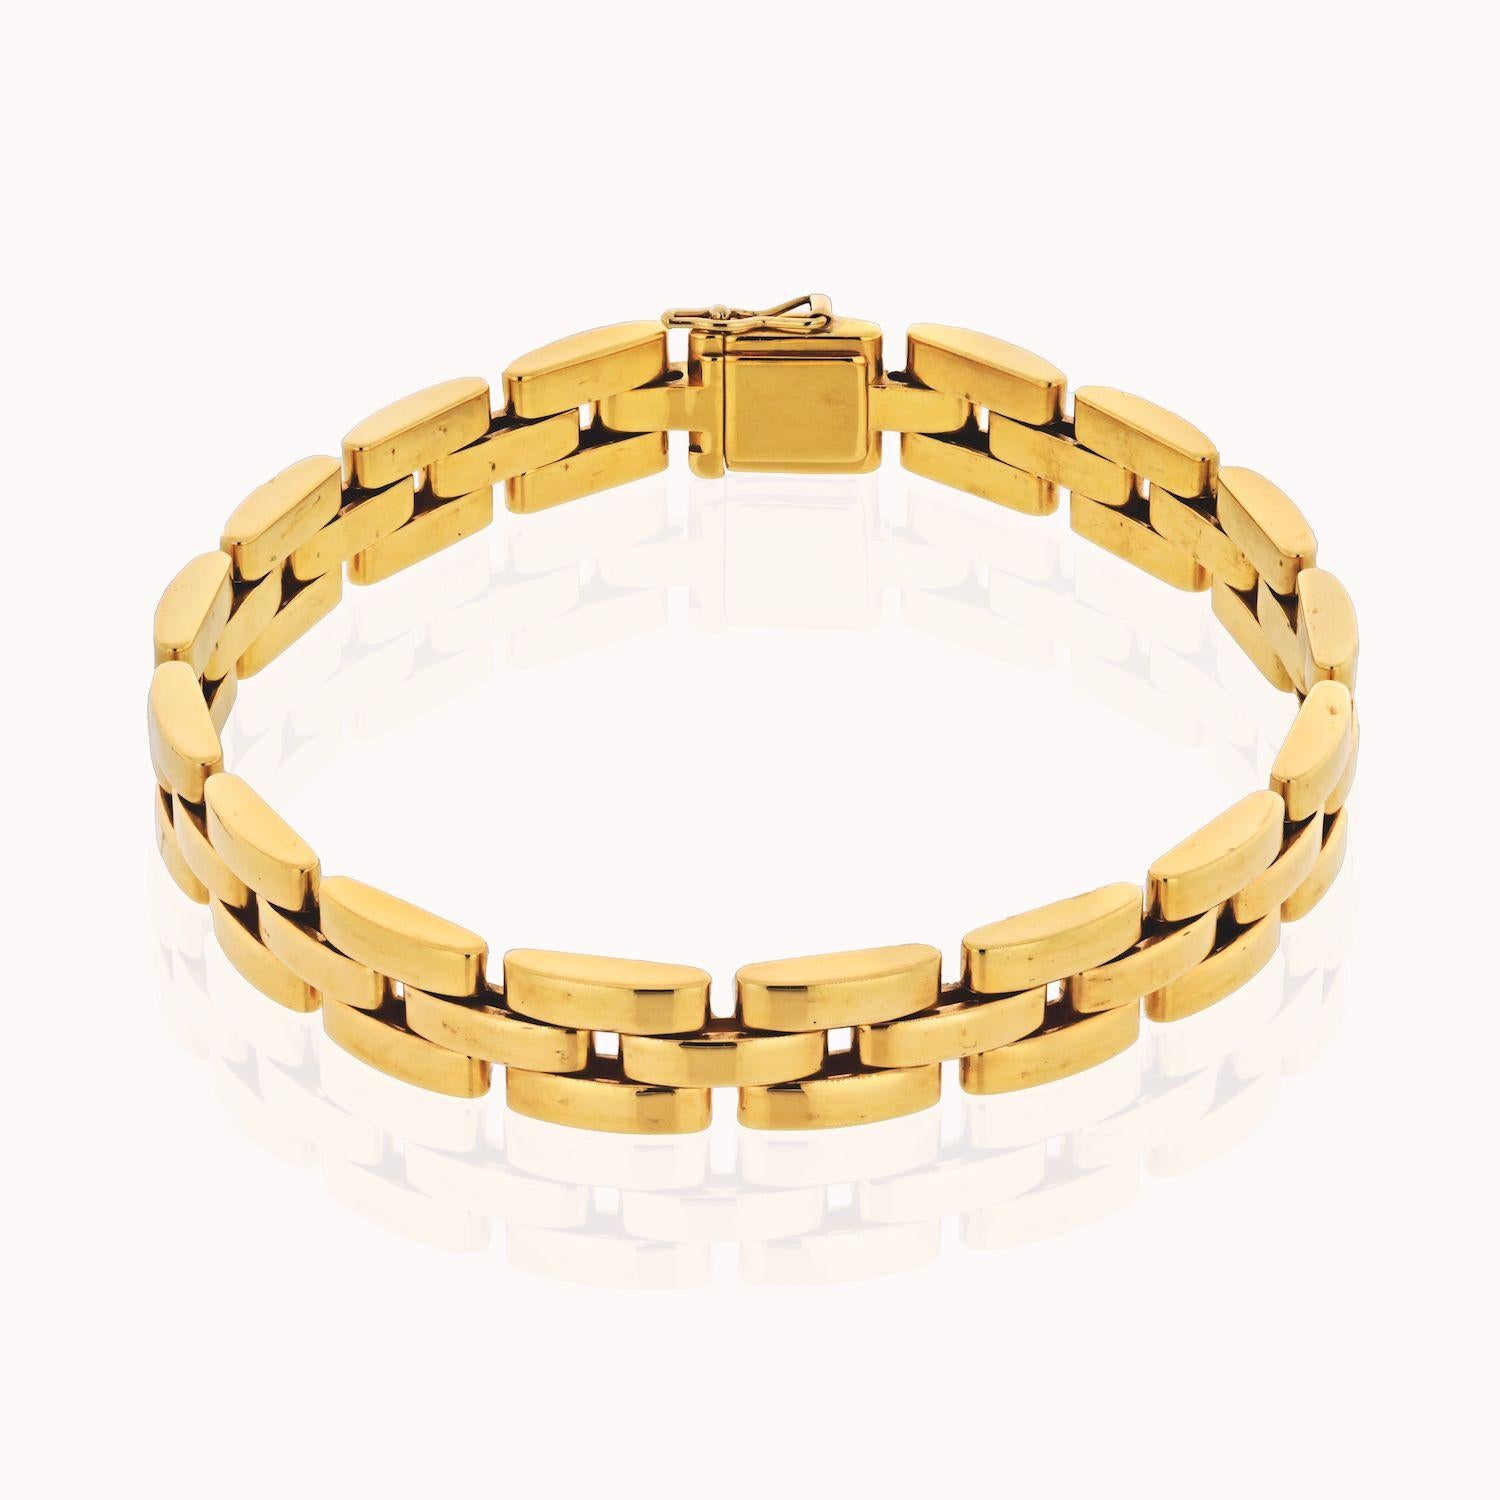 An 18k yellow gold Maillon Panthere bracelet by Cartier. The bracelet is made up of iconic flat 18k yellow gold solid links with a tongue clasp fastening. The bracelet measures 7 inches and has a gross weight of 40 grams. 
